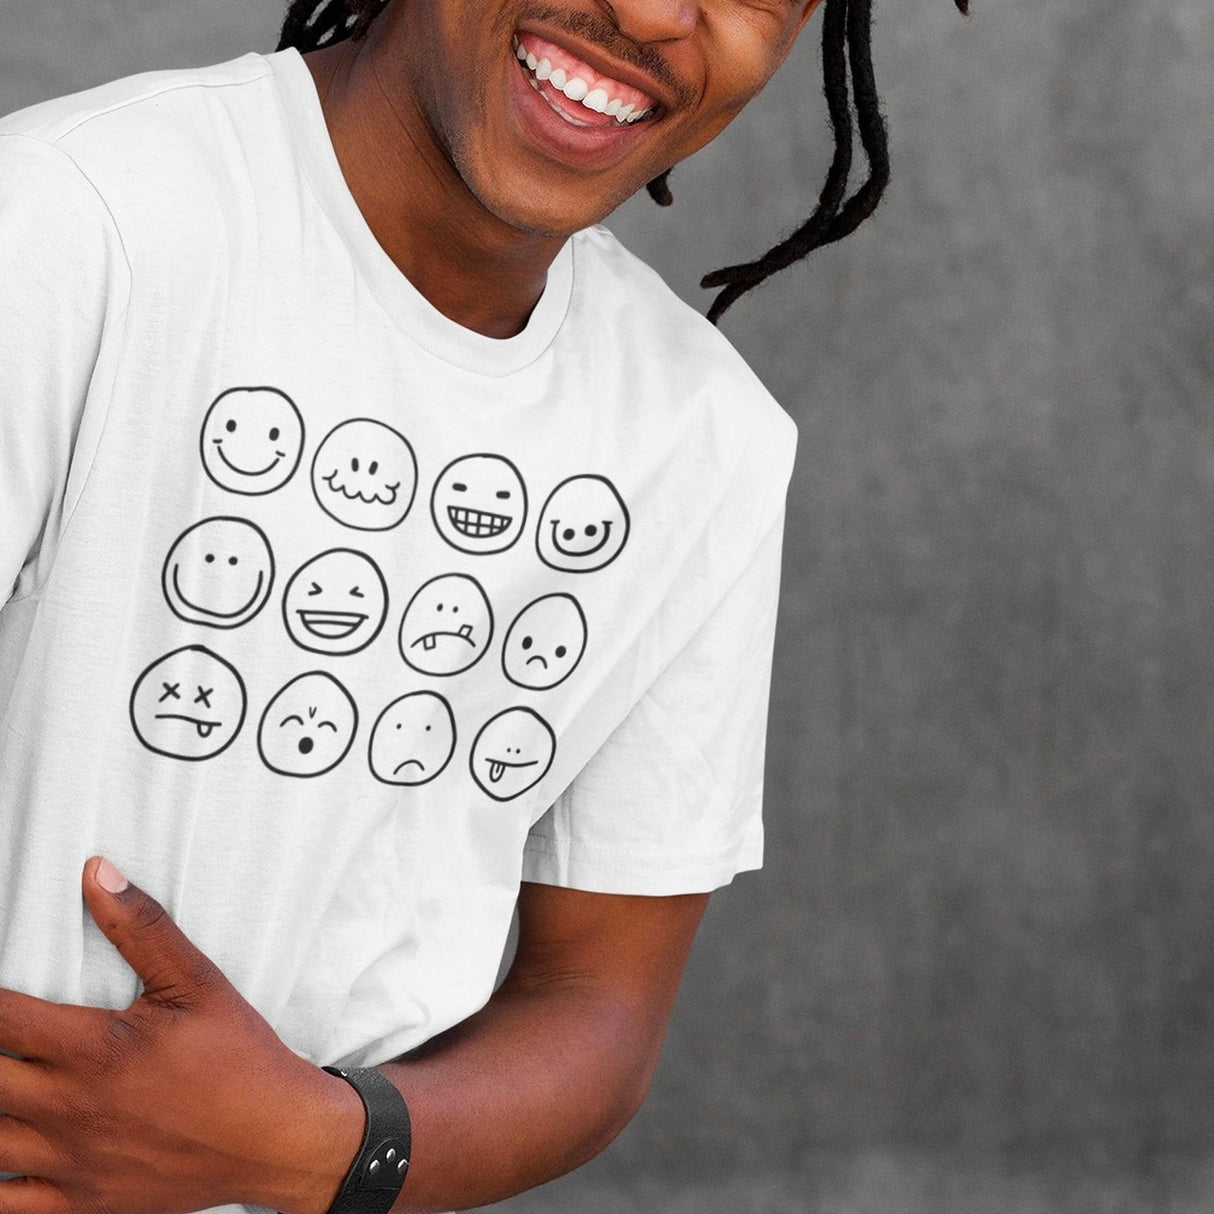 black-and-white-outlines-of-hand-drawn-smiley-faces-smiley-tee-smile-t-shirt-smiley-face-tee-funny-t-shirt-emoticon-teewhite#color_white